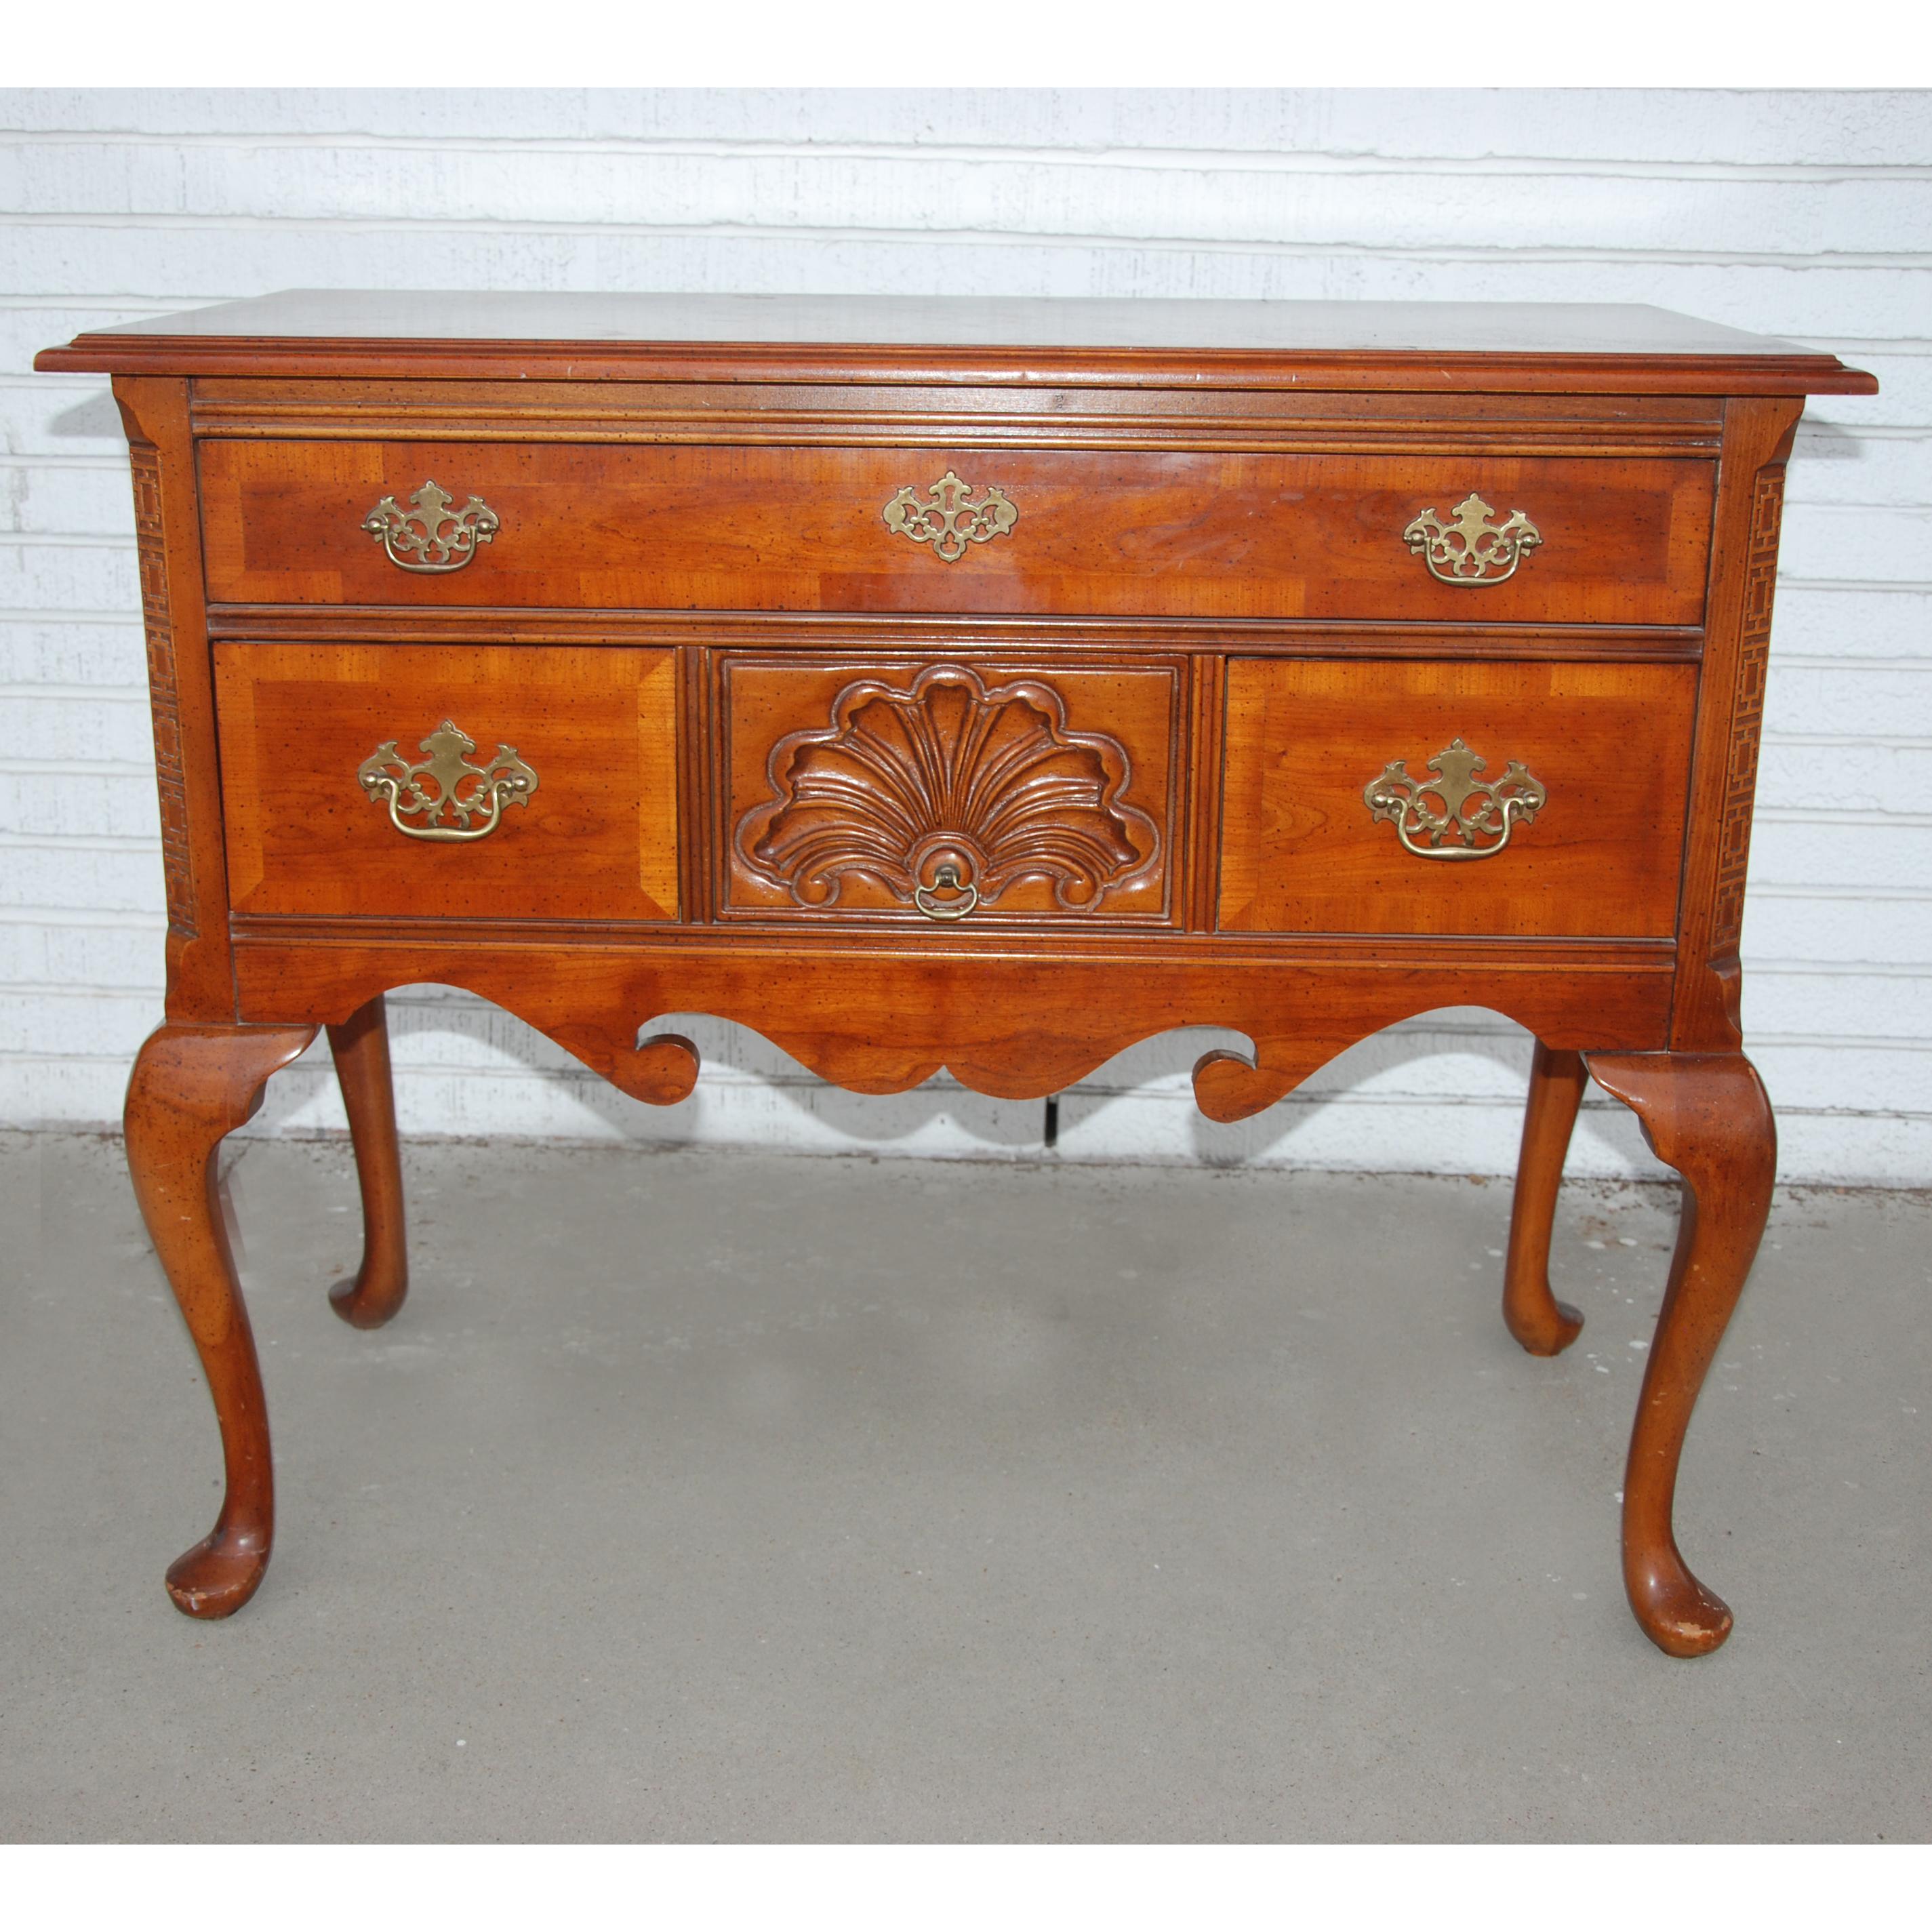 Queen Anne style server credenza from Bassett Furniture

Petite credenza in walnut with traditional Queen Anne embellishments.
Dovetailed drawer construction
Brass hardware
Cabriole legs with pad feet
One top drawer with 3 small underneath